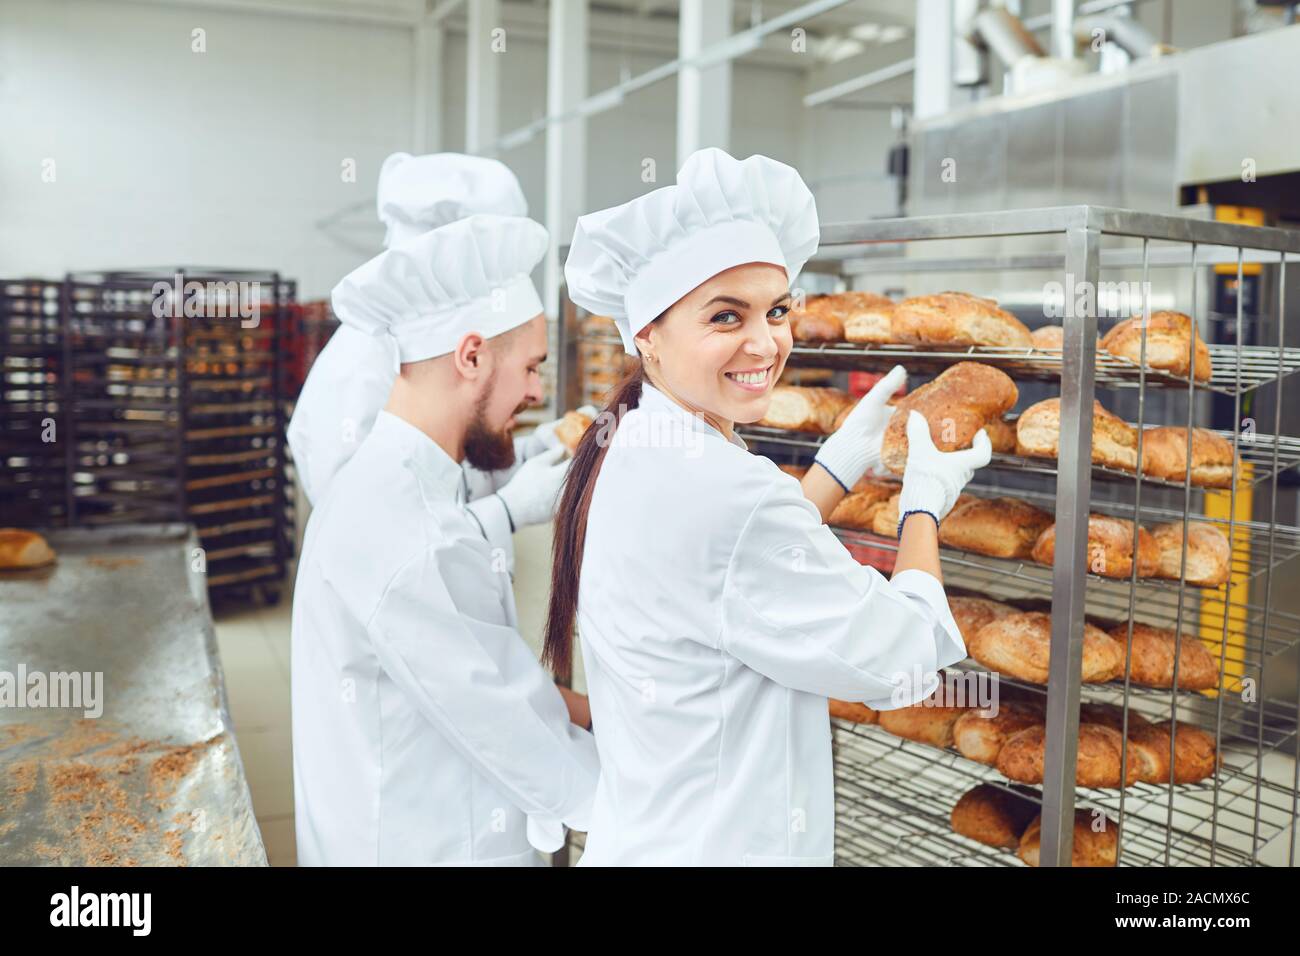 Smiling colleagues working in bakery manufacture Stock Photo